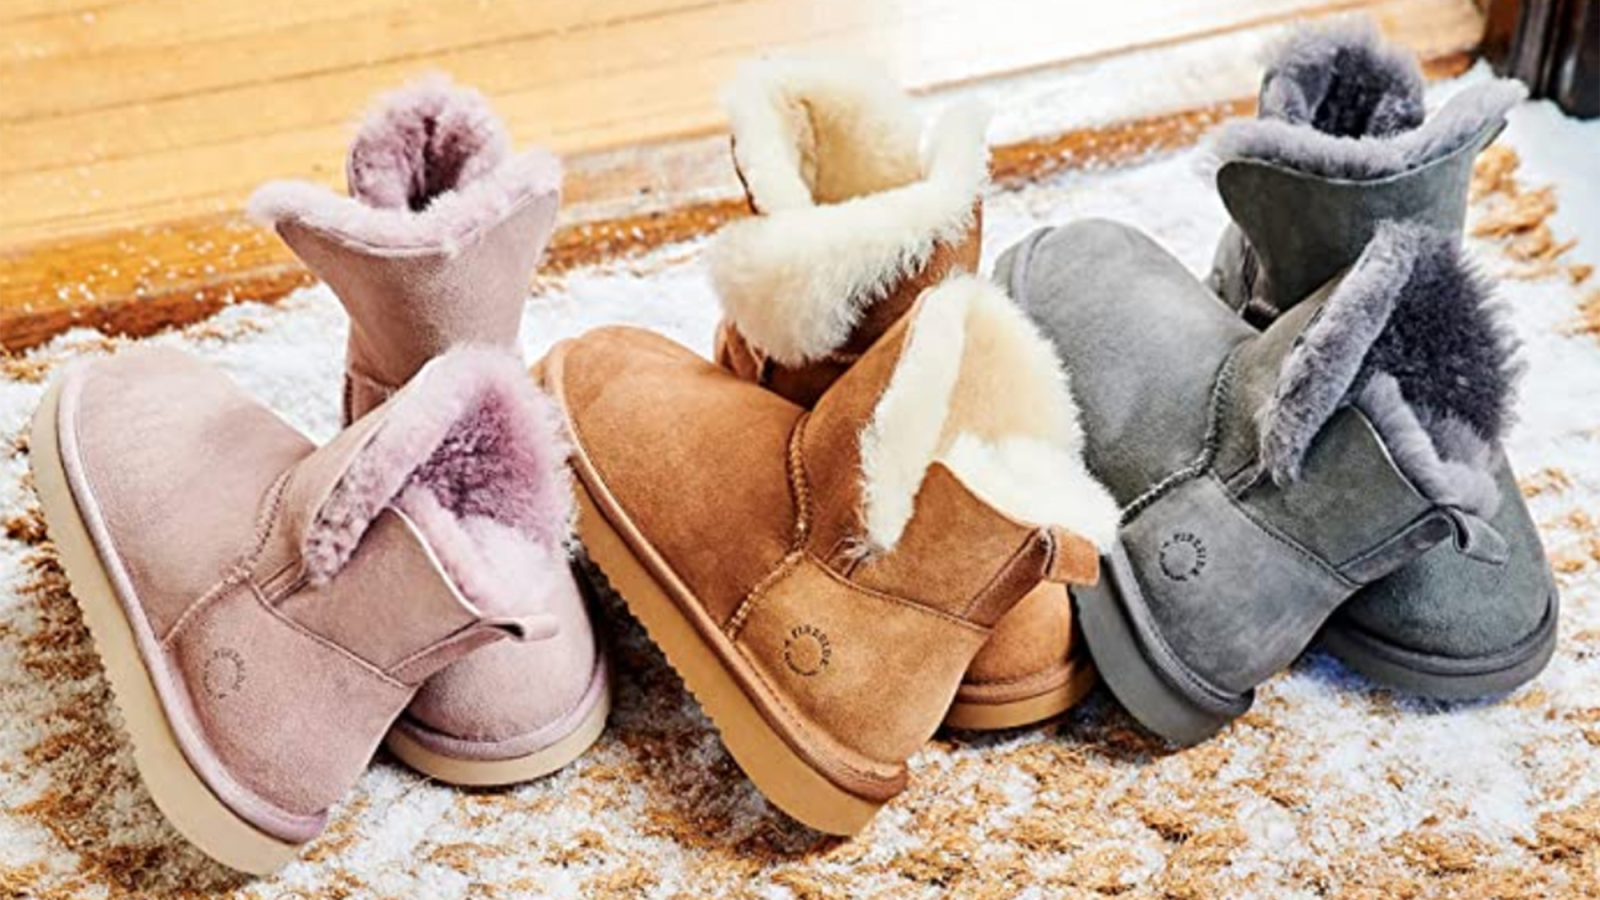 19 Ugg Alternatives for Winter: Cute Ugg-Like Boots & Slippers